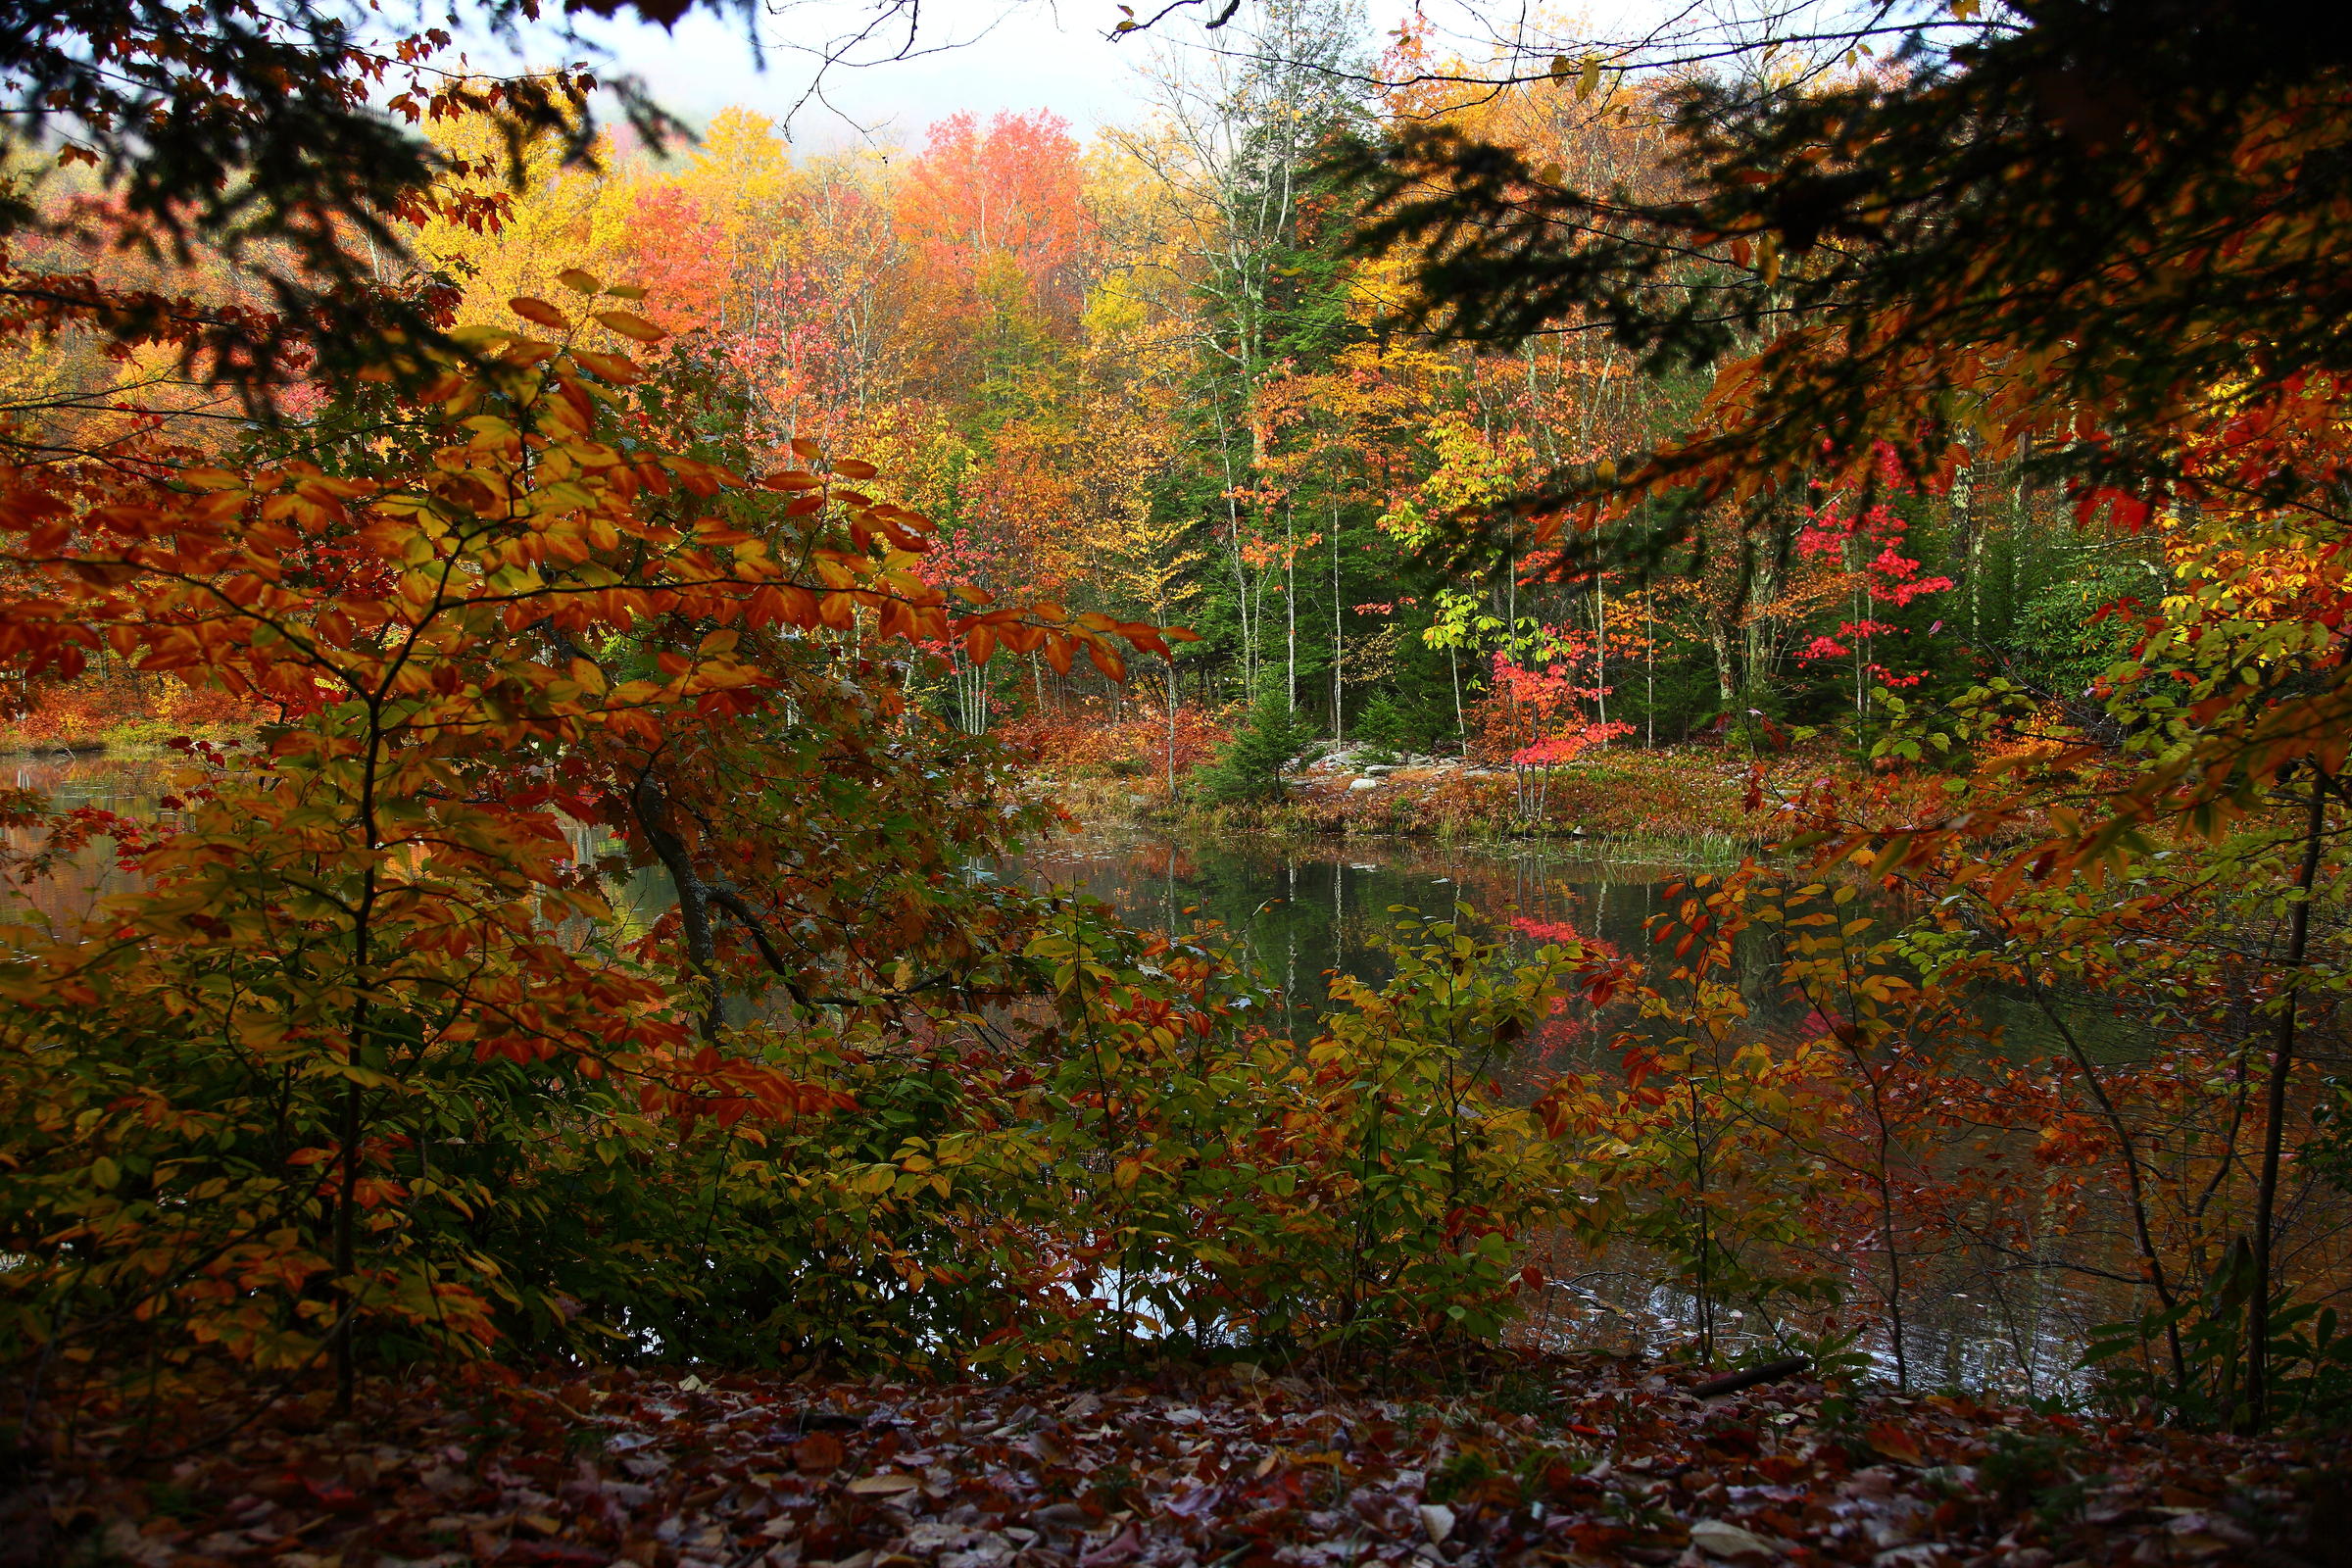 Where's the best place to see fall foliage in WV? West Virginia